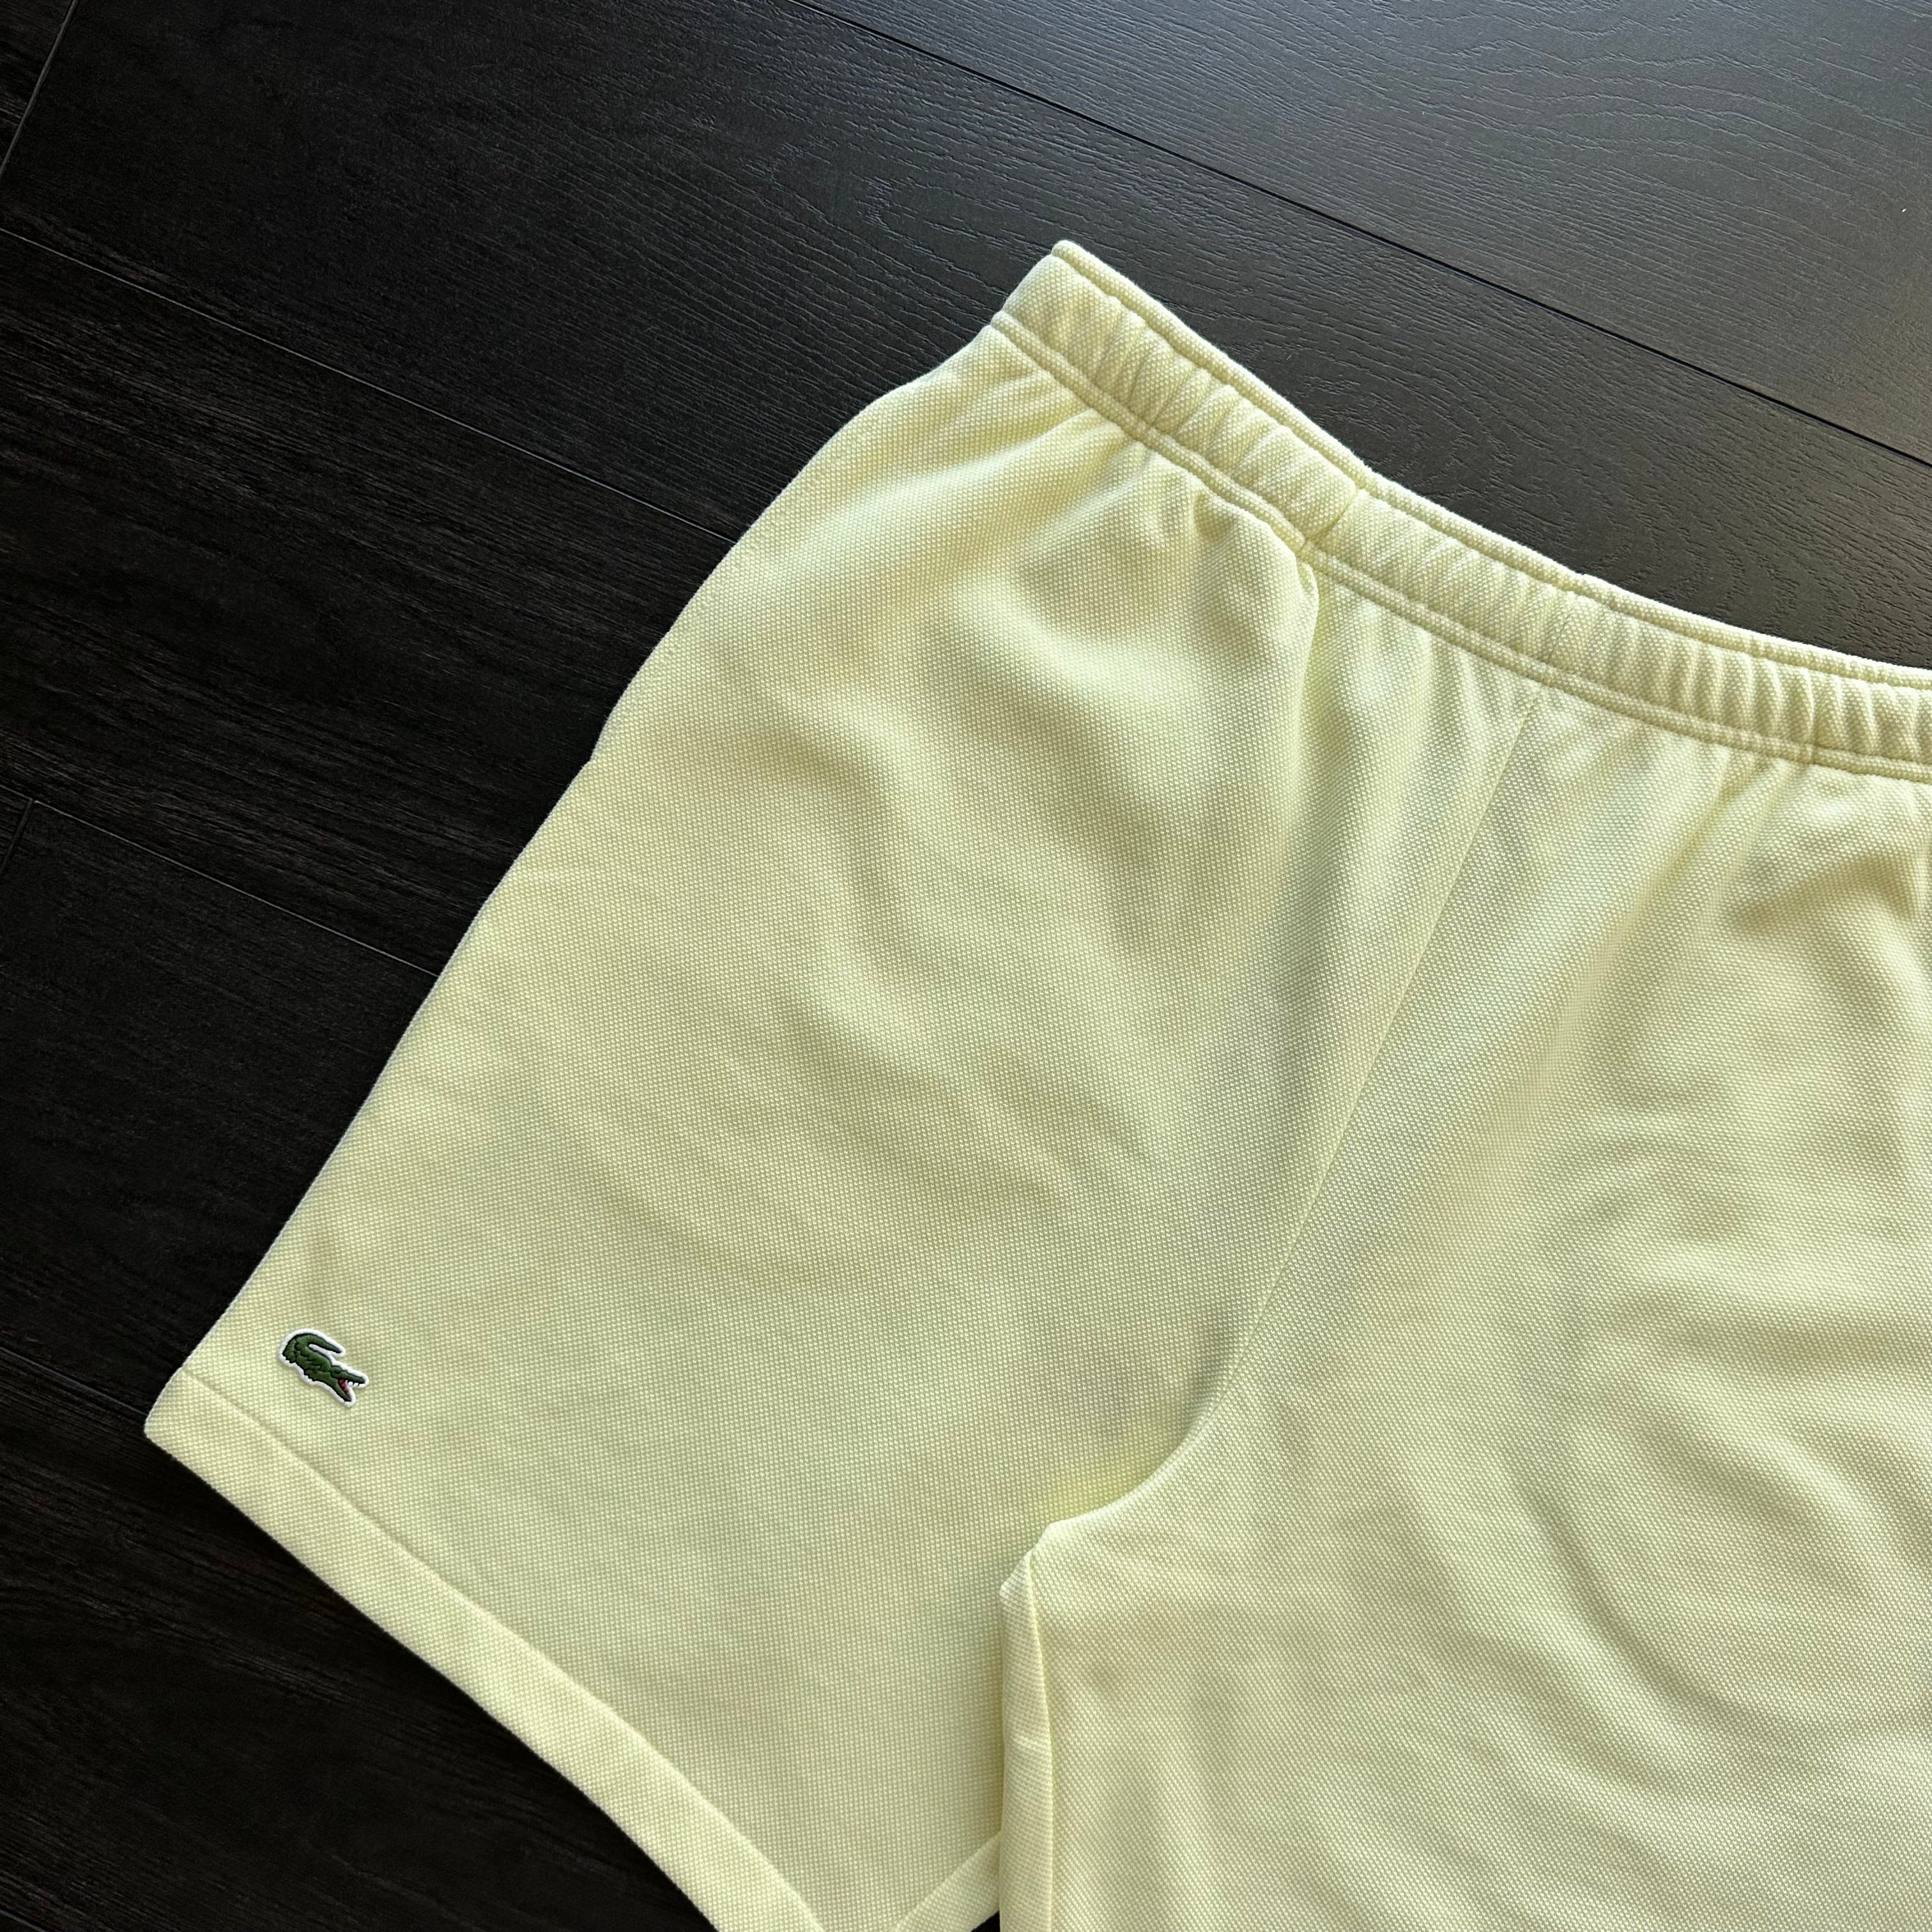 Supreme/Lacoste Pique Shorts – Not Your Father's Gear